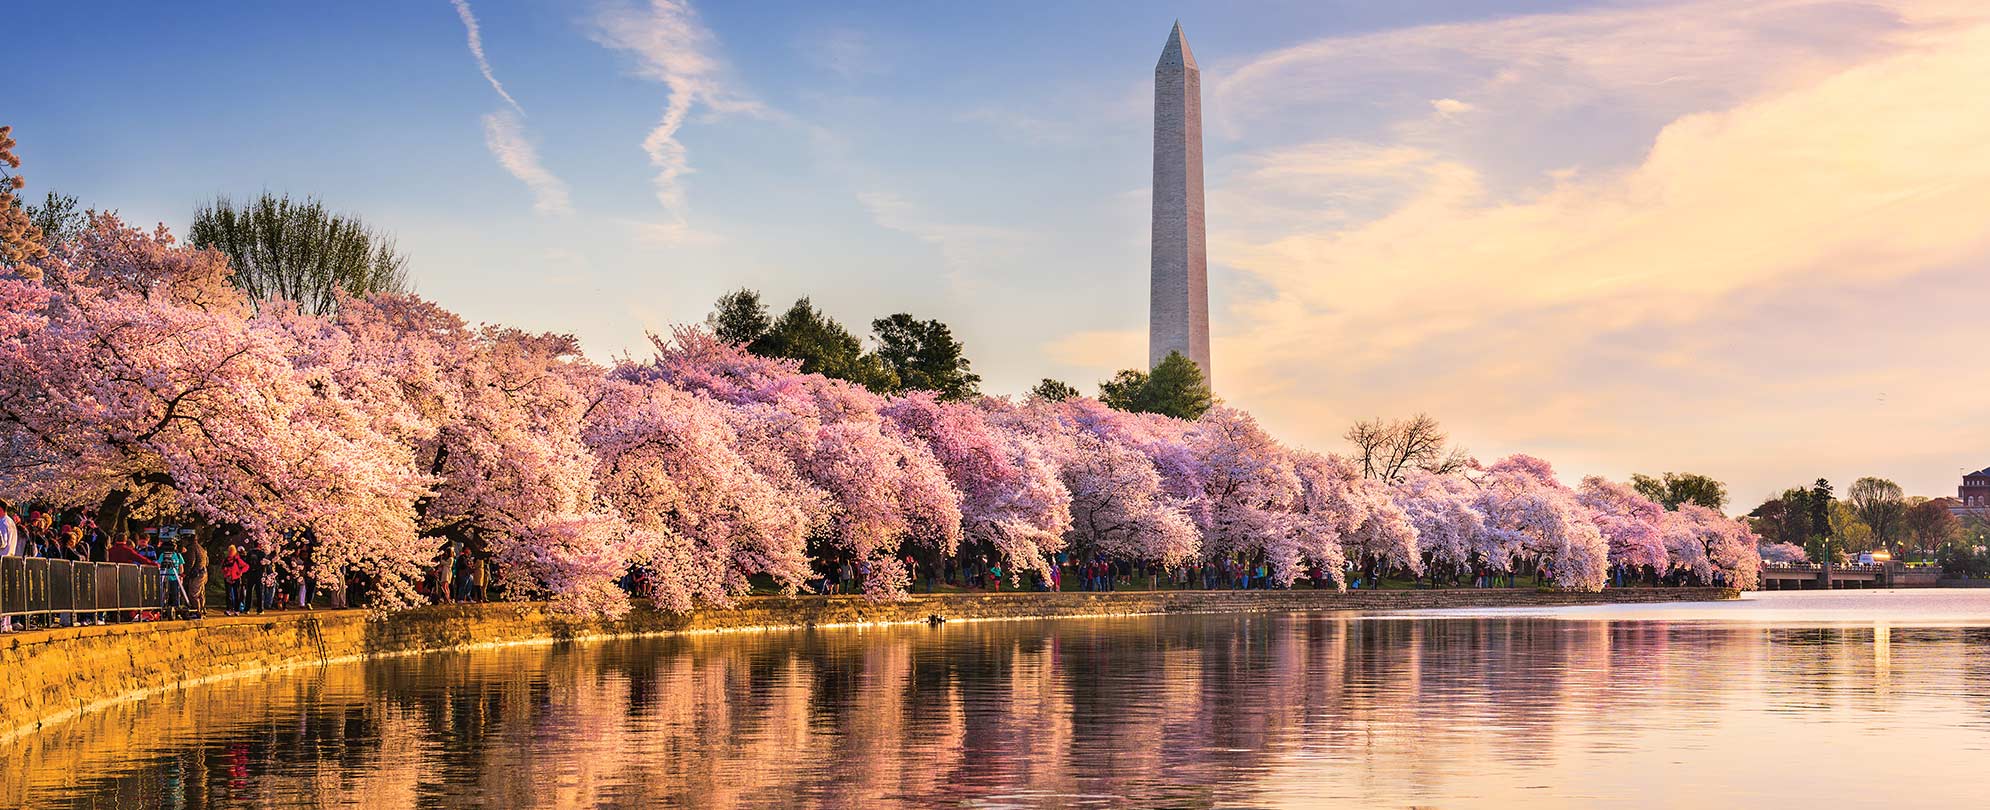 The Washington Monument in Washington DC behind a lake and blooming cherry blossom trees.